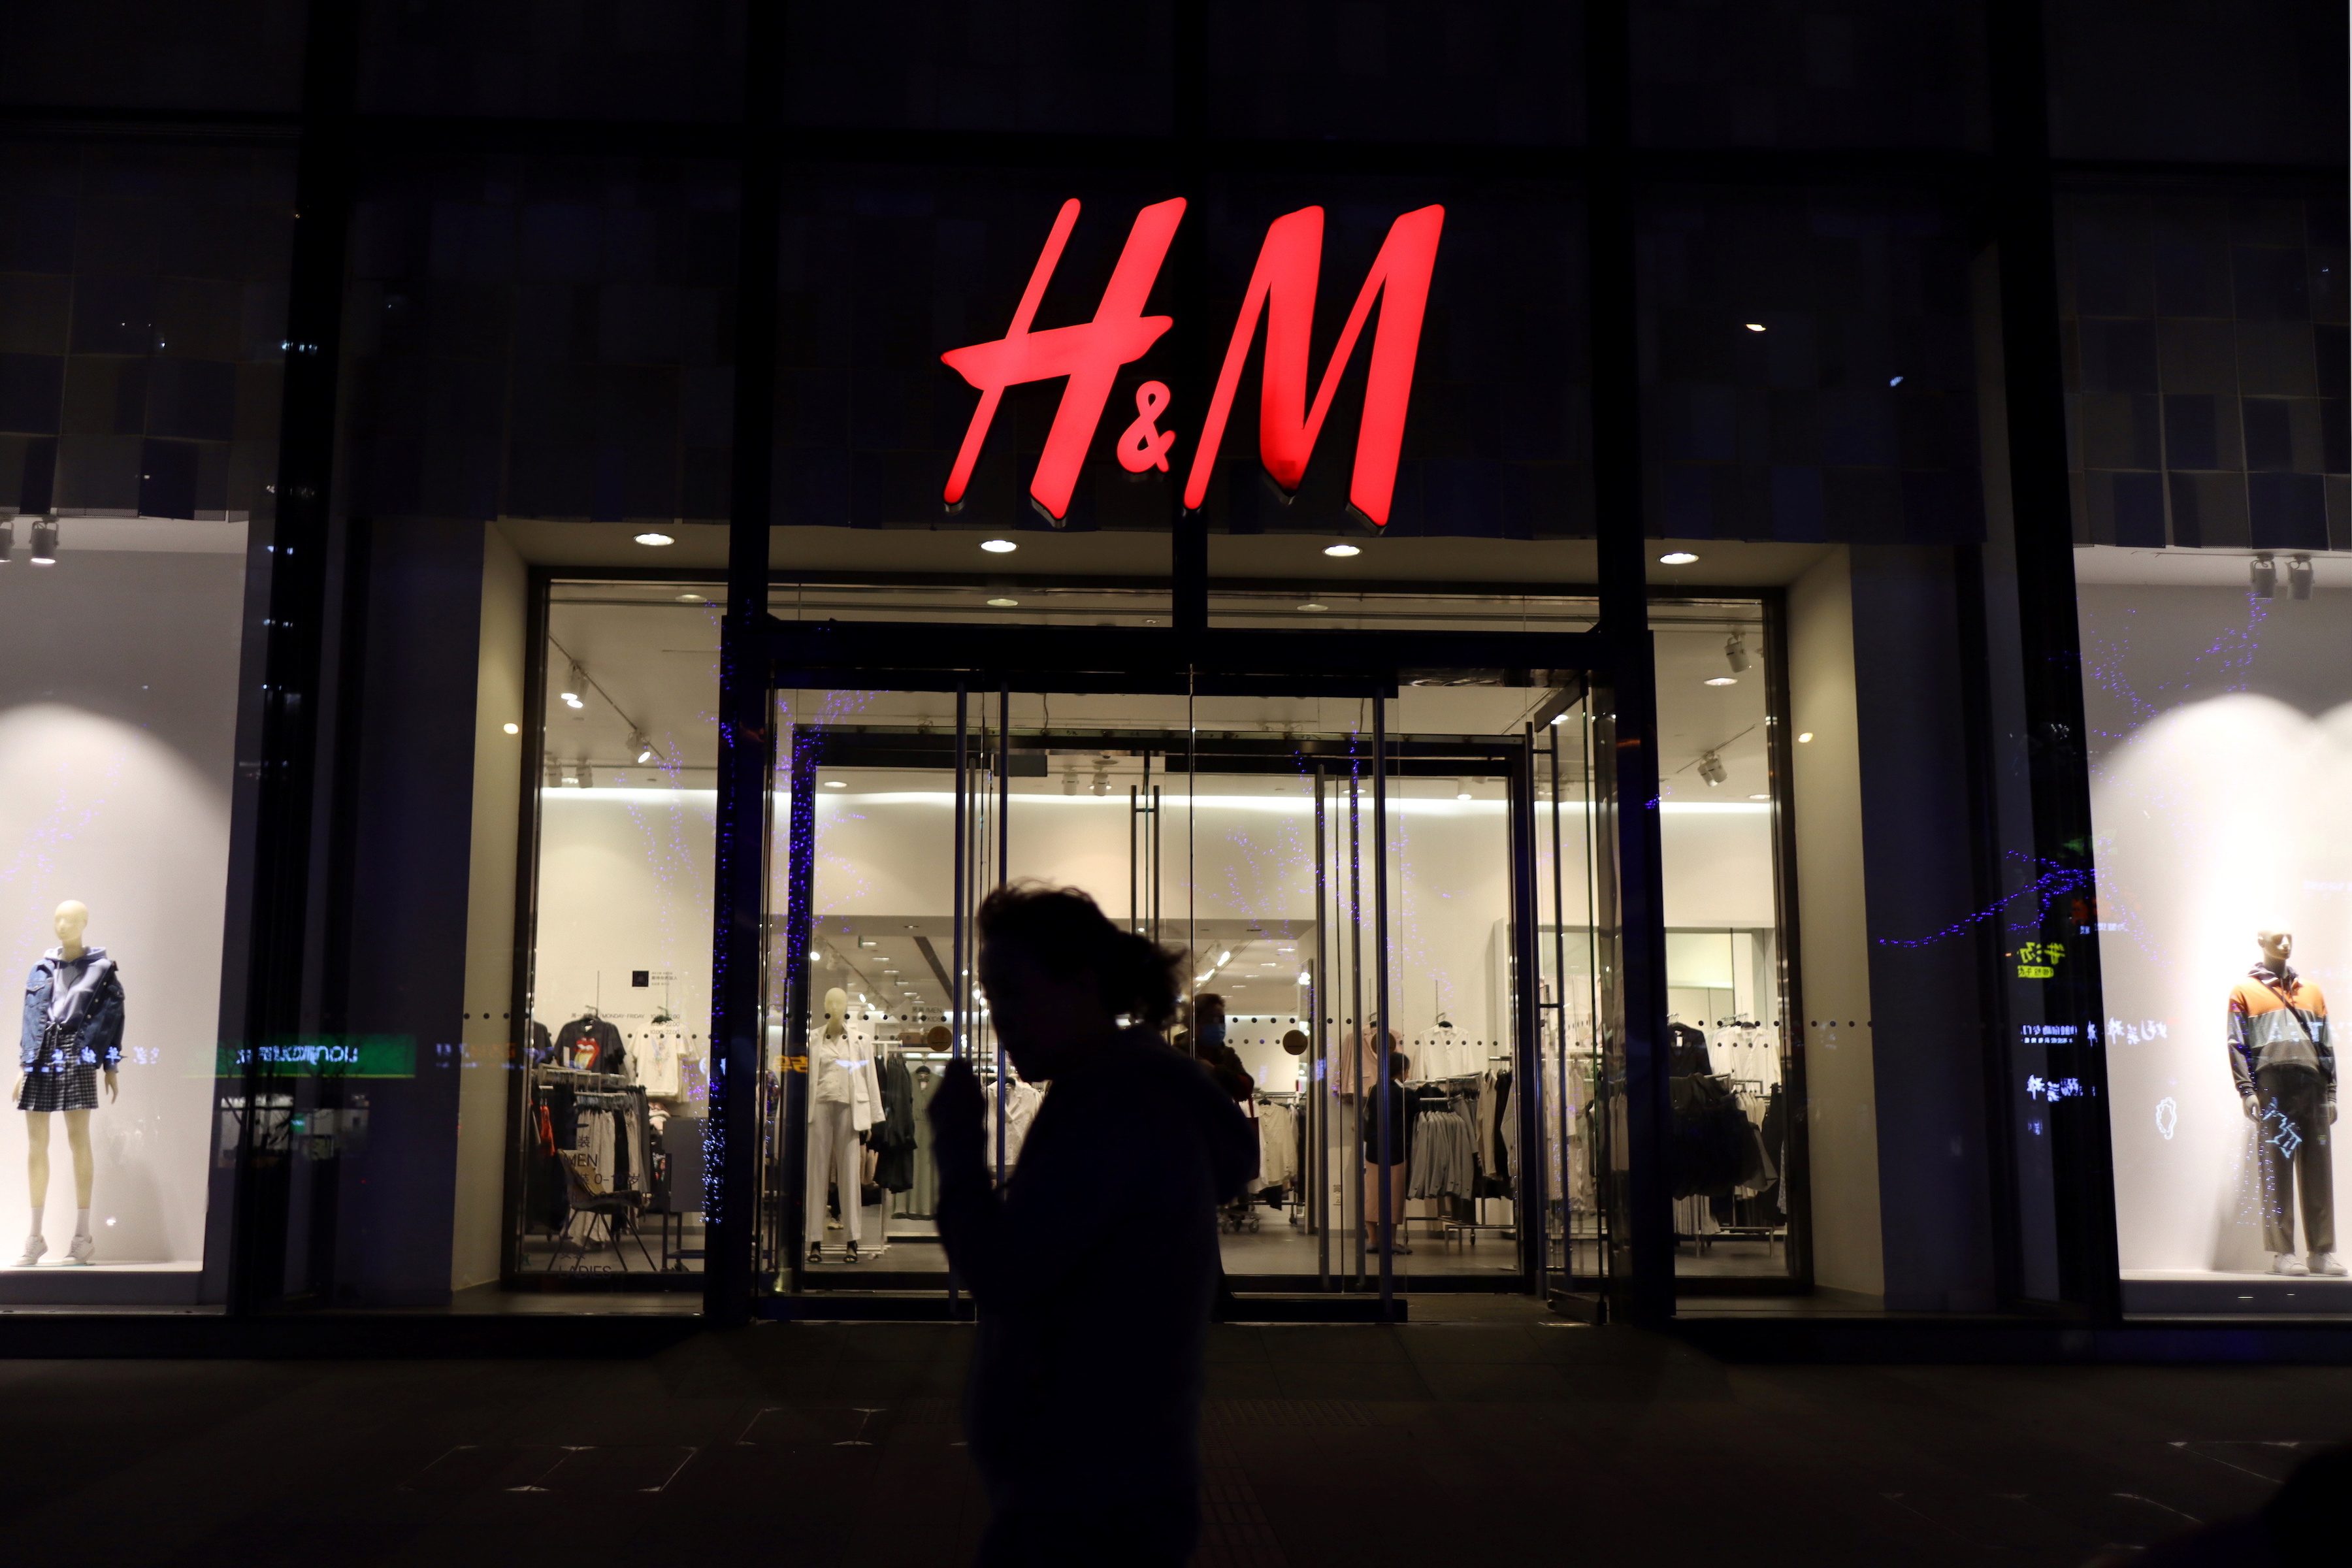 Old H&M comment on ‘forced labor’ in China’s Xinjiang raises online storm